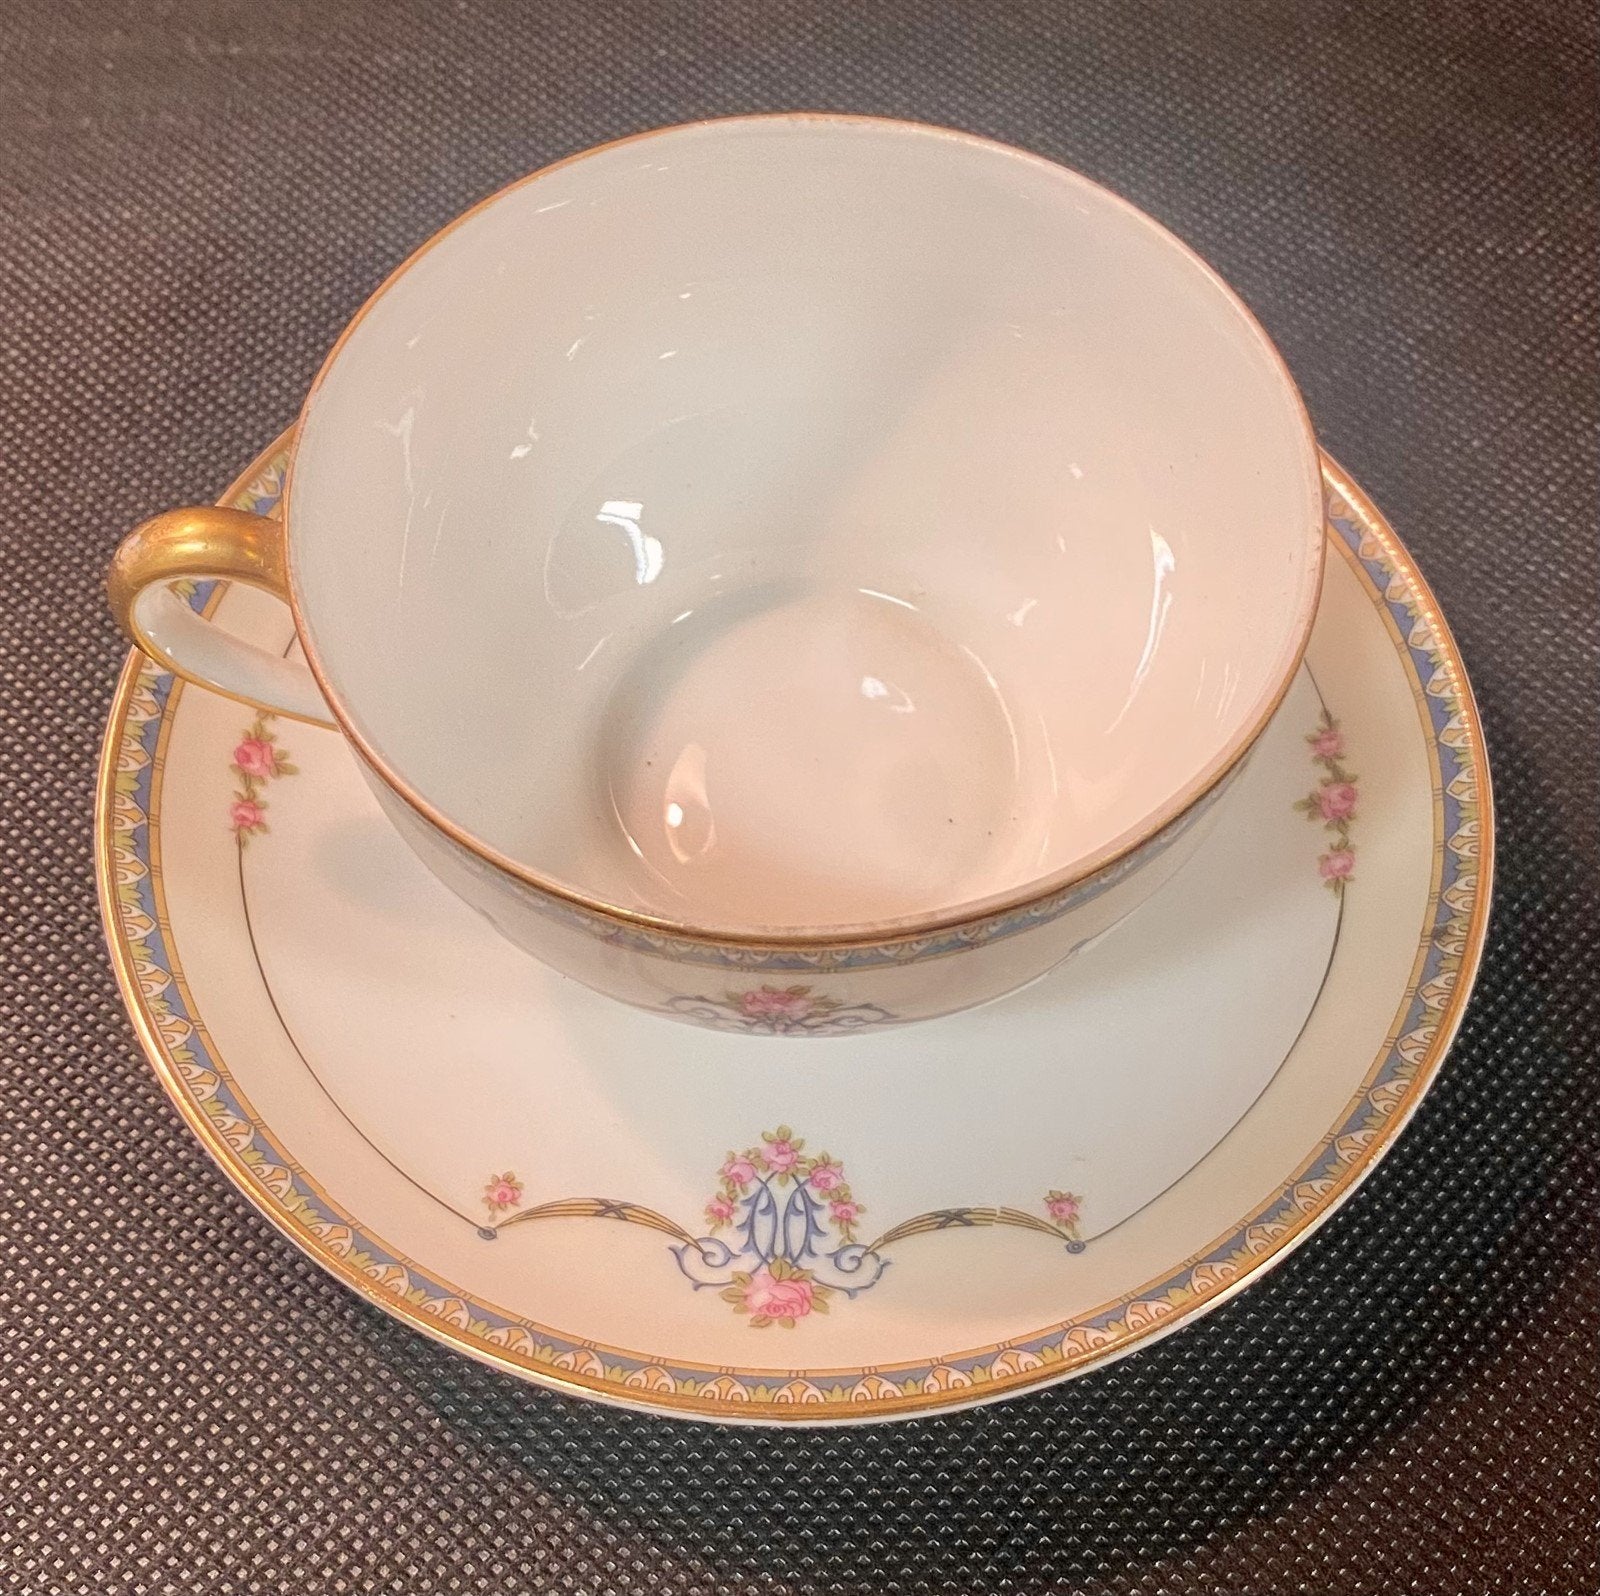 1920s Antique Noritake Japan Teacup and Saucer in Laureate Pattern